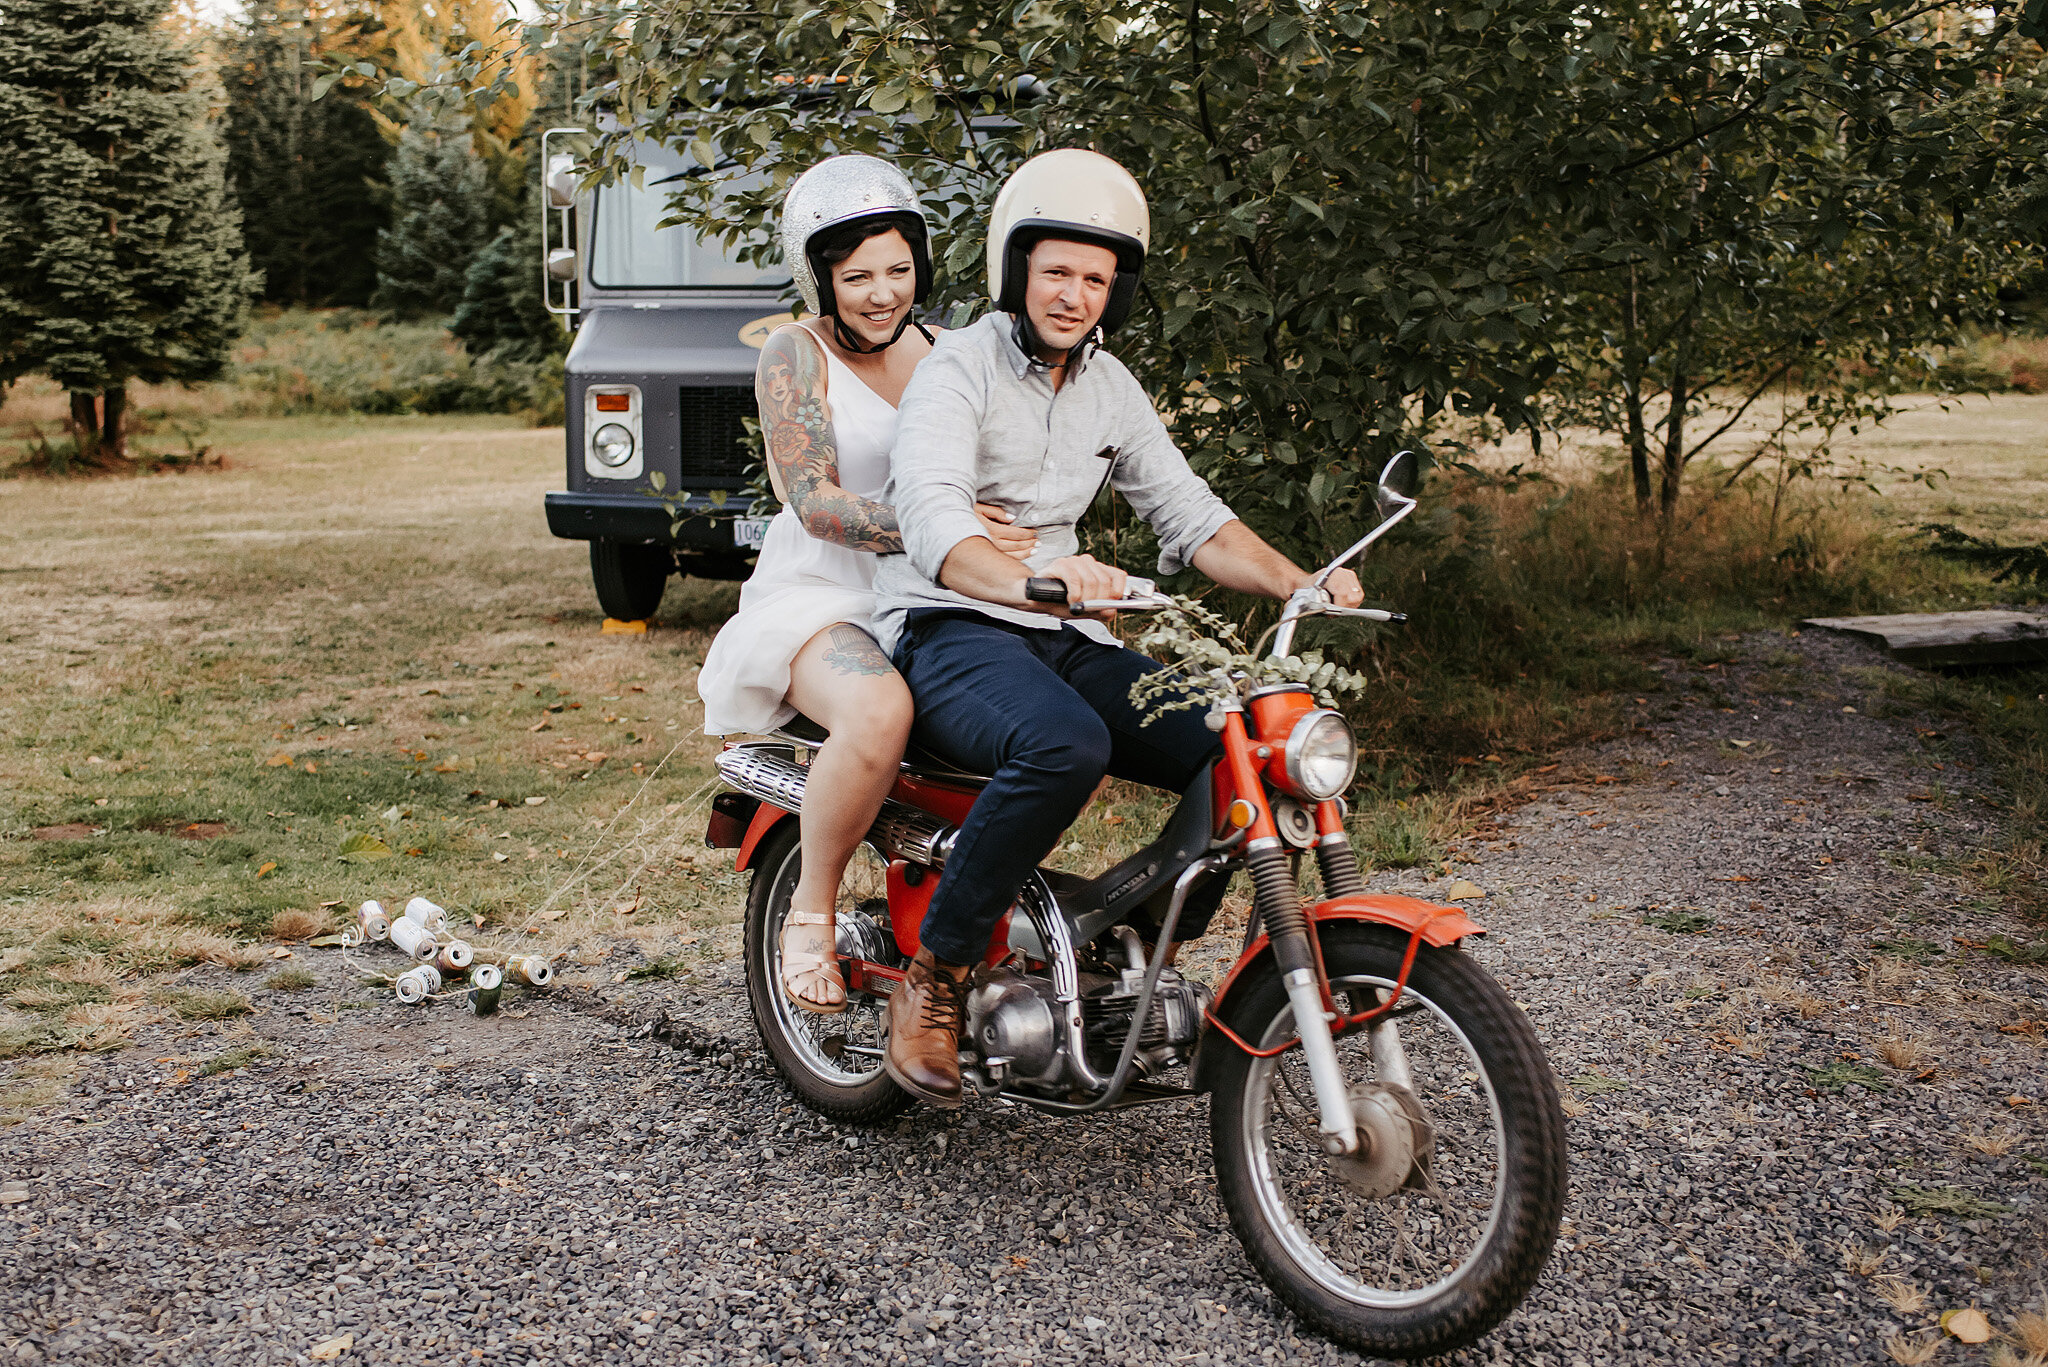 Bride and groom ride on motorcycle during their wedding reception